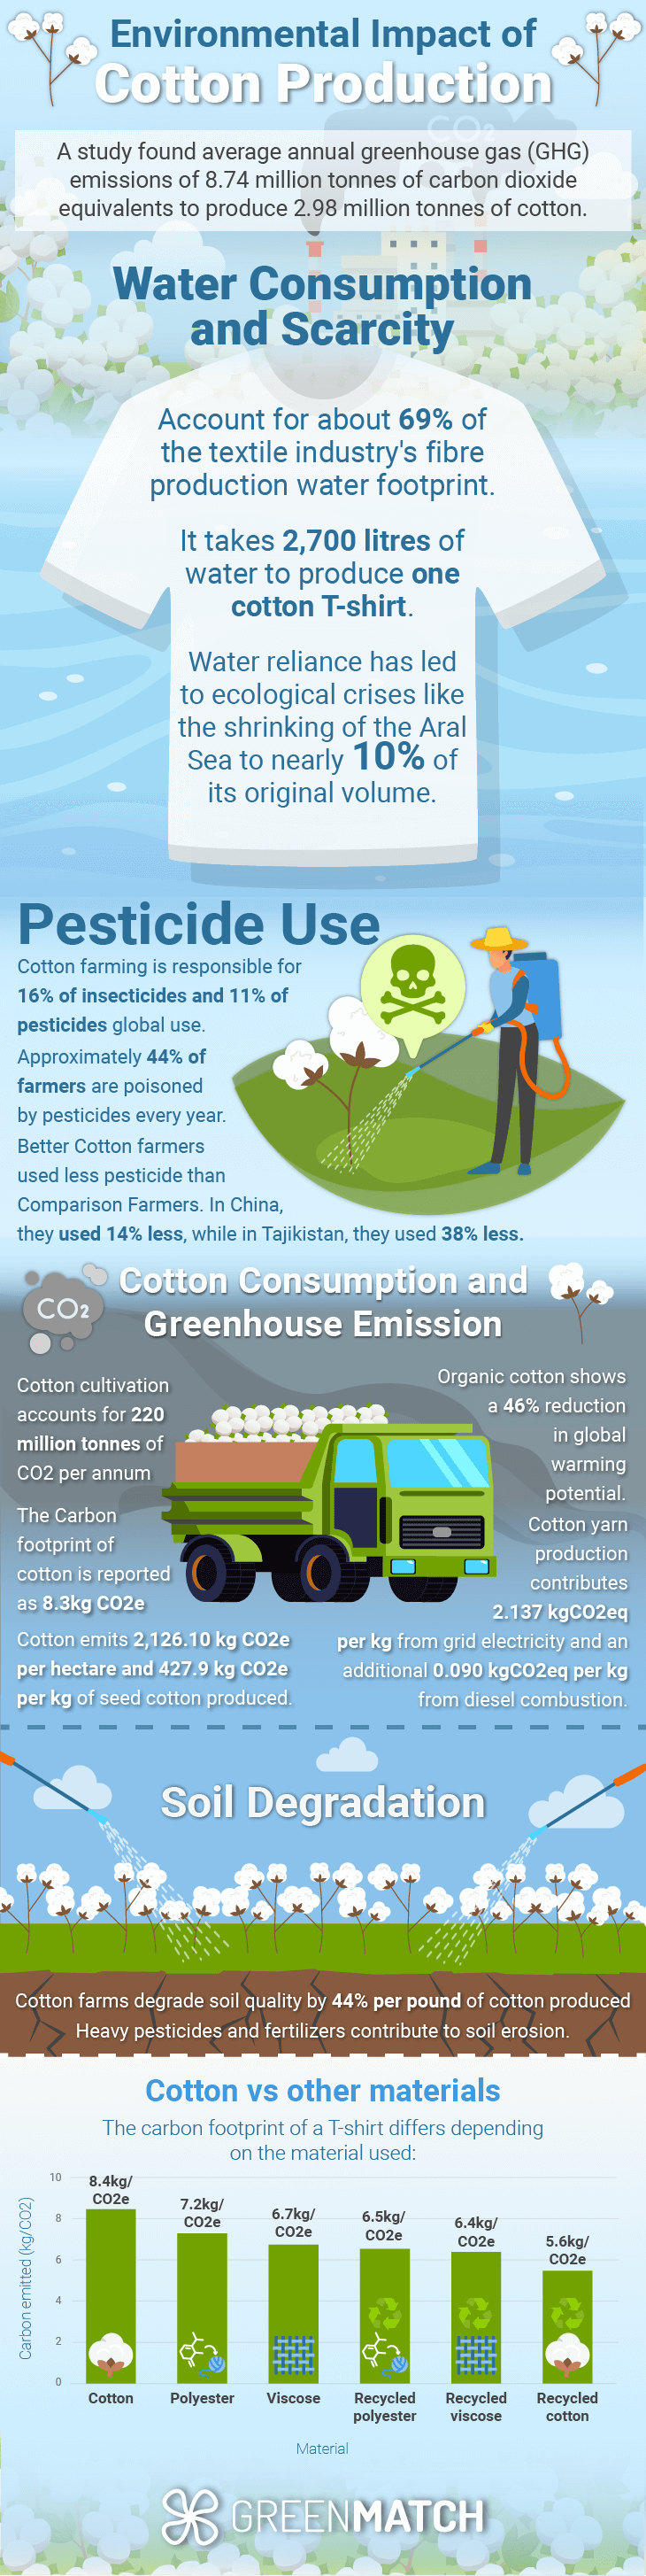 Cotton farming is highly water-intensive, with estimates suggesting that producing one kilogram can require over 10,000 litres of water.